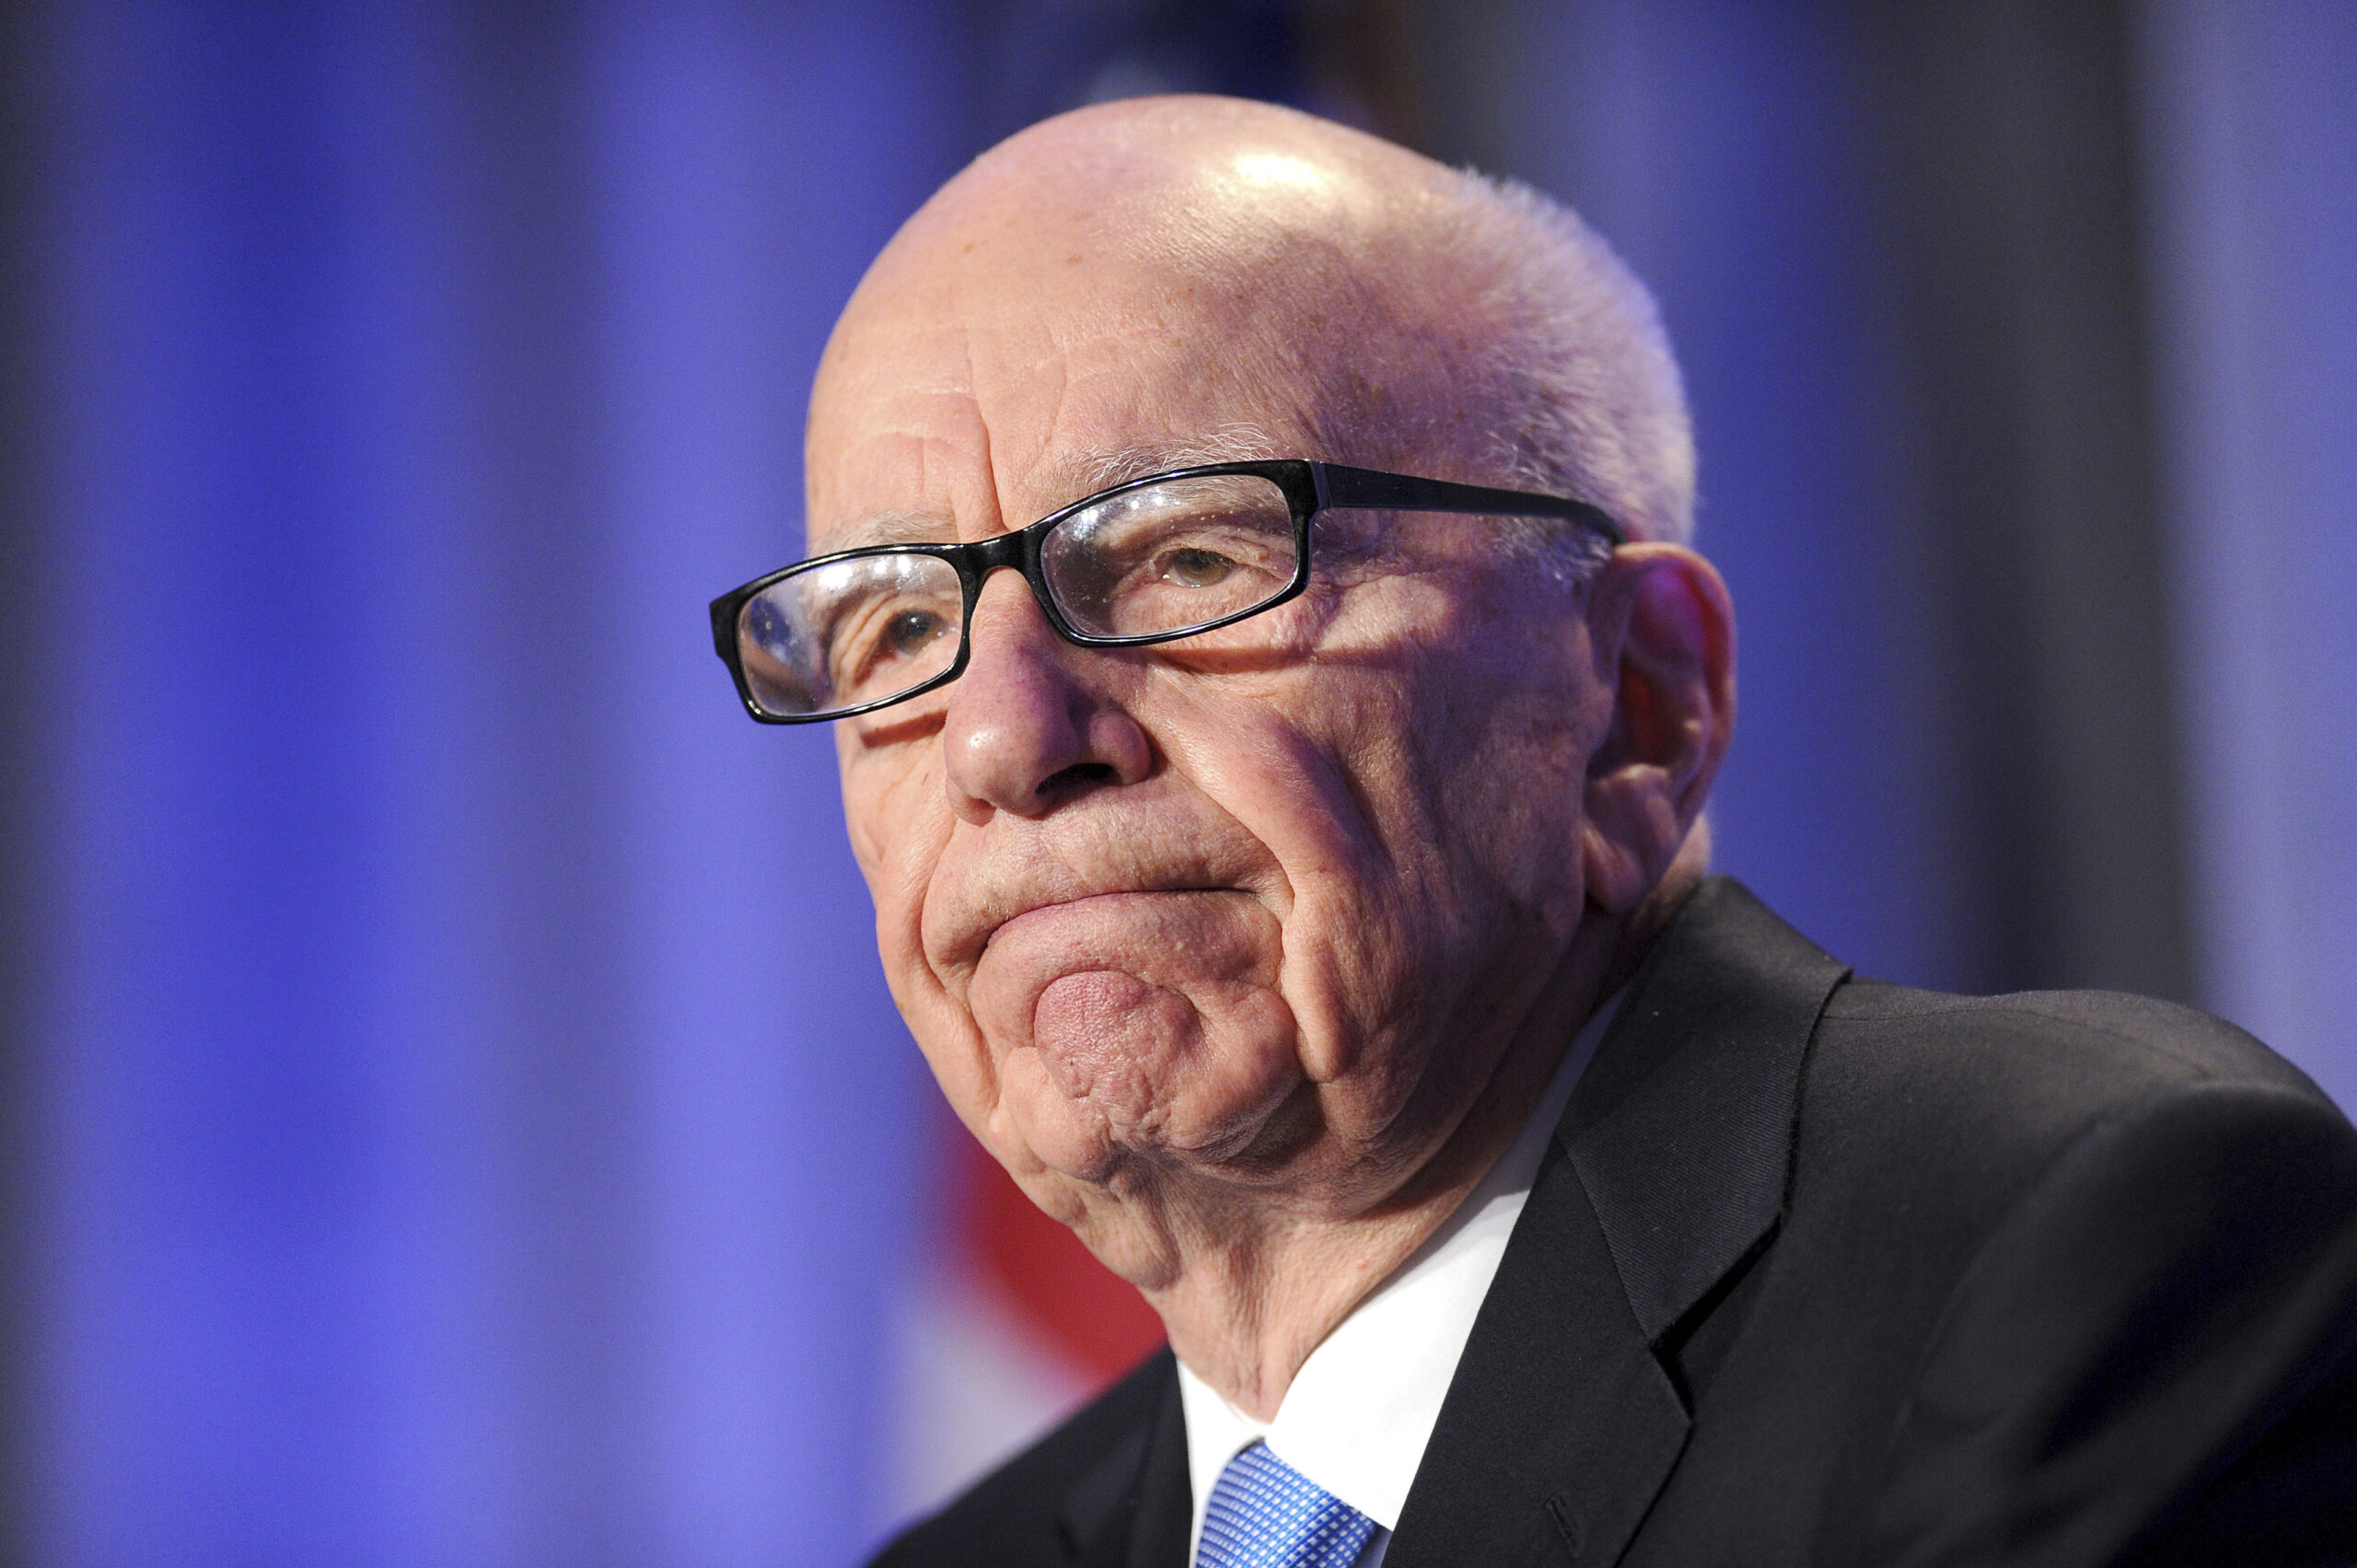 How much of our minds has media mogul Rupert Murdoch shaped?